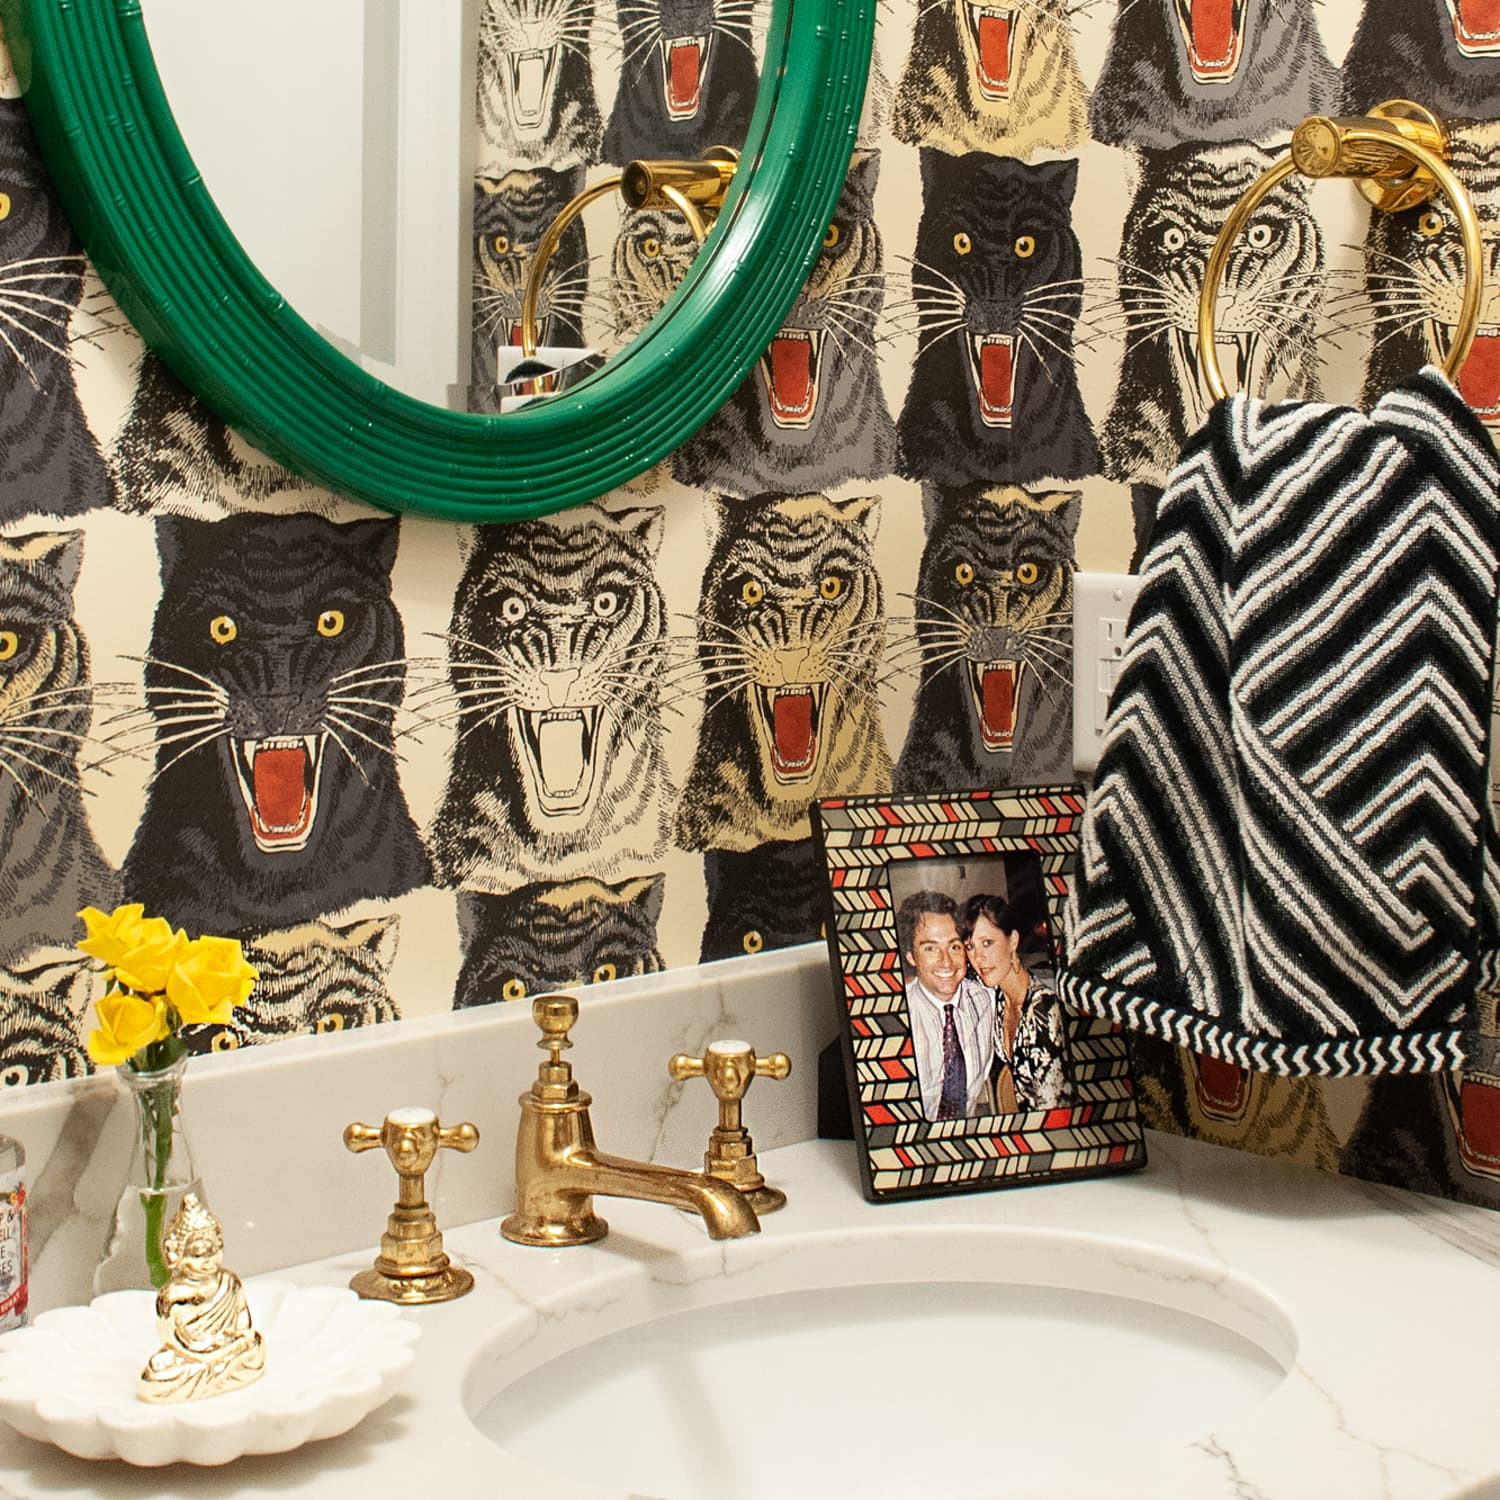 6 Unexpected and Bold Ideas for Bathroom Decor (Steal These Ideas!)